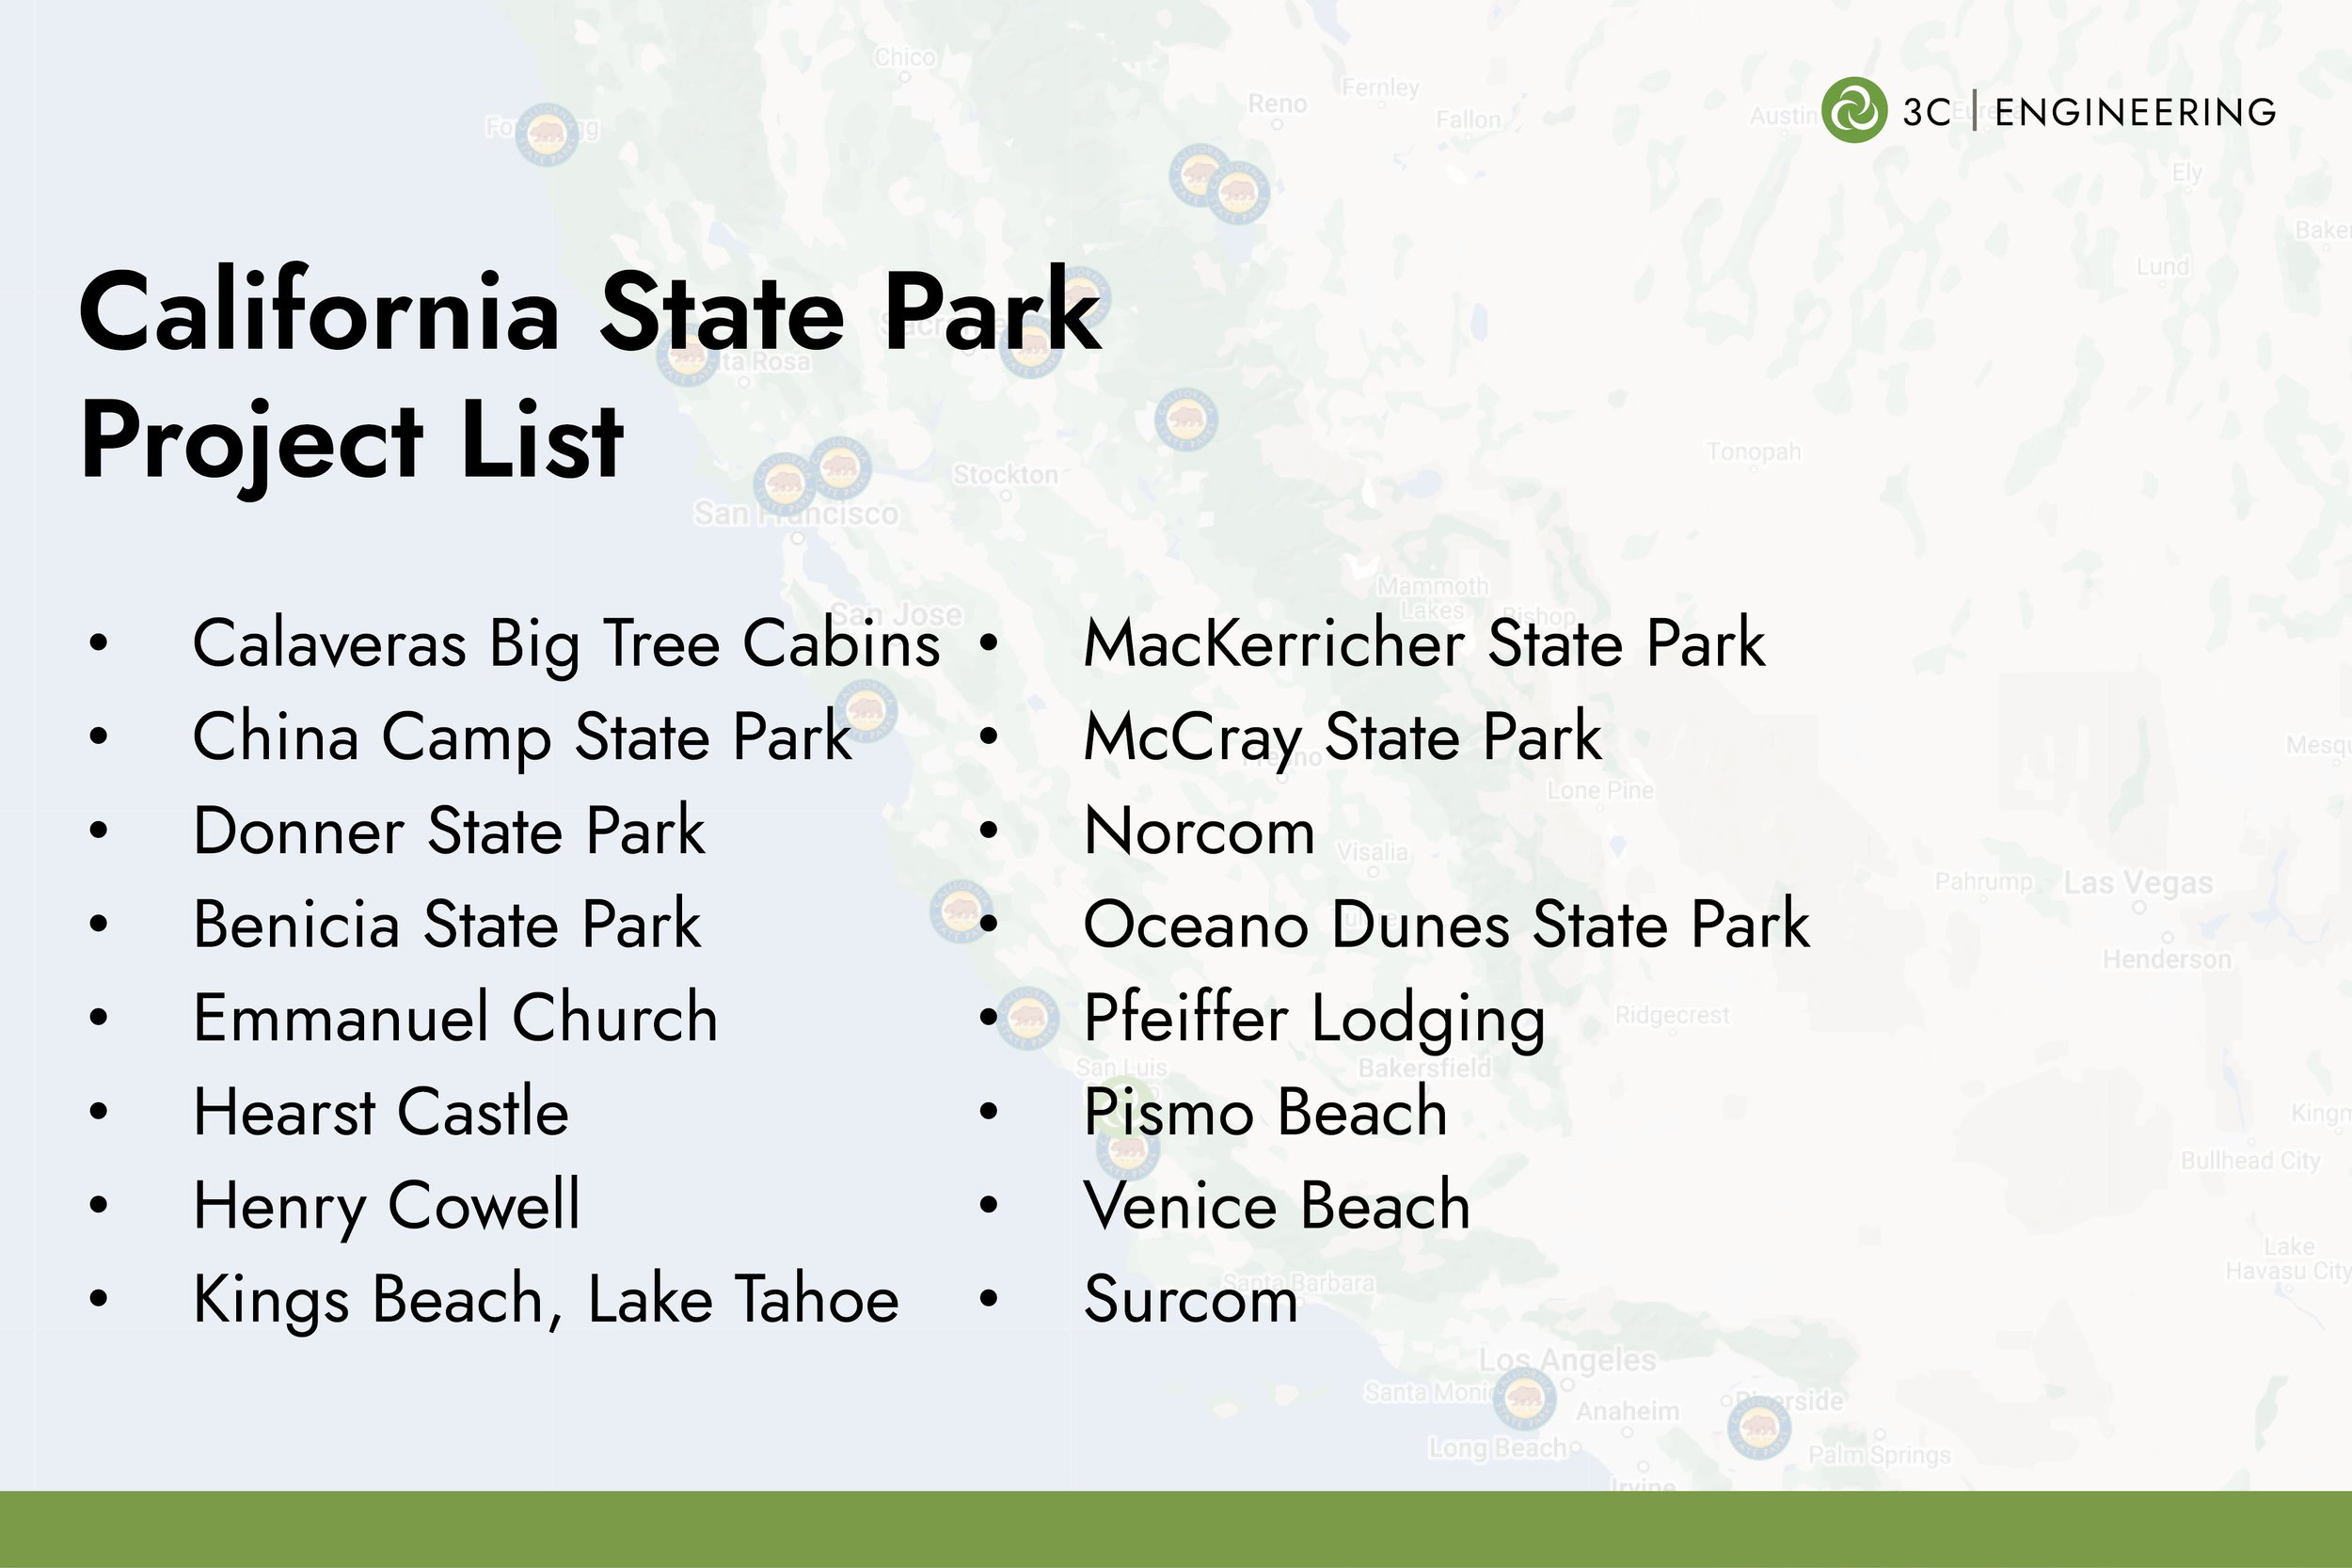 Building-Commissioning-CA-State-Parks